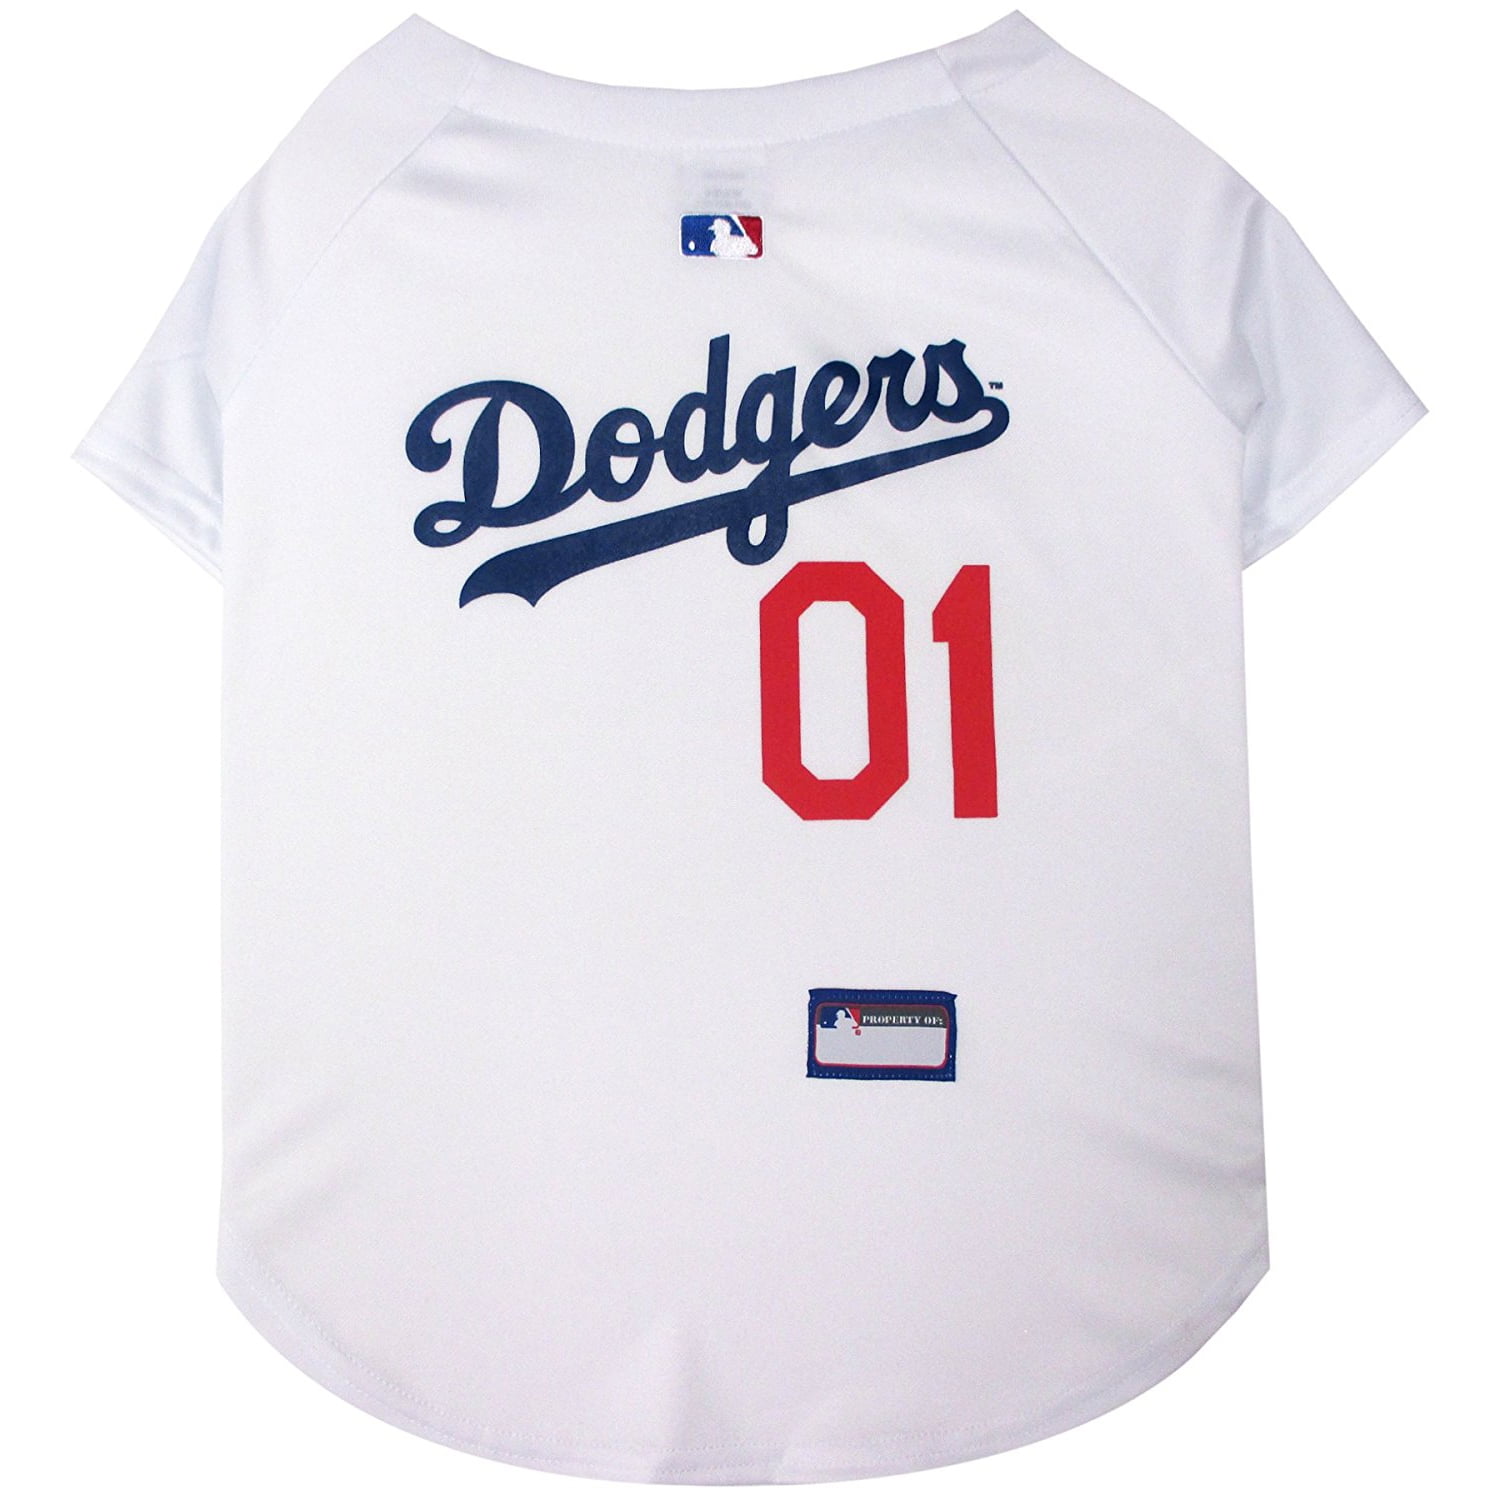 dodgers jersey large